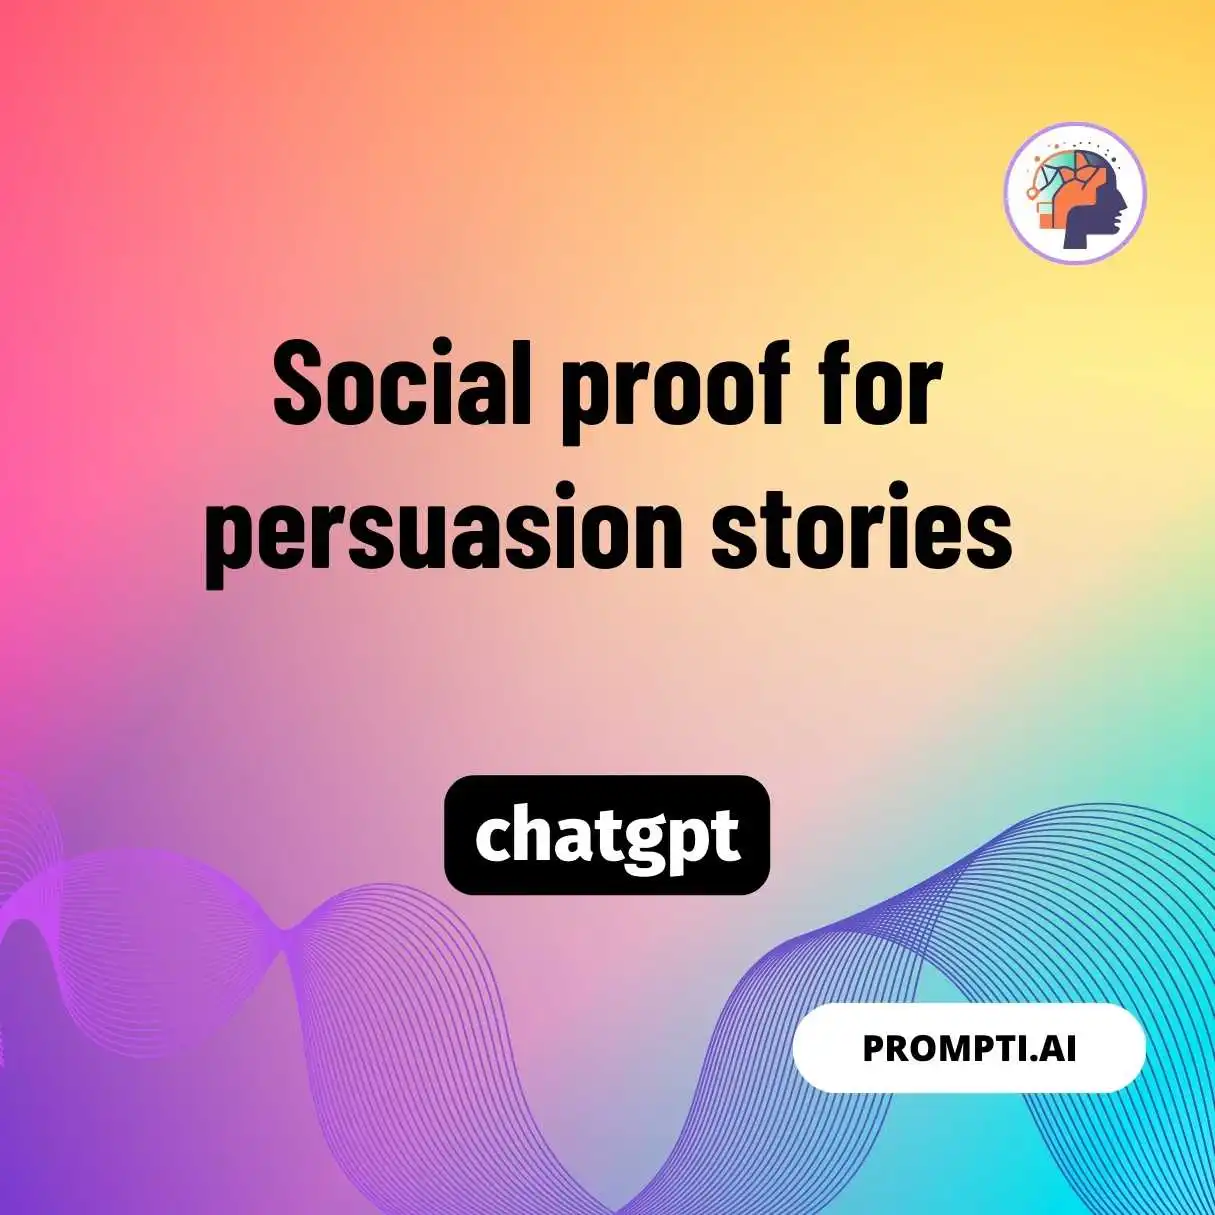 Social proof for persuasion stories